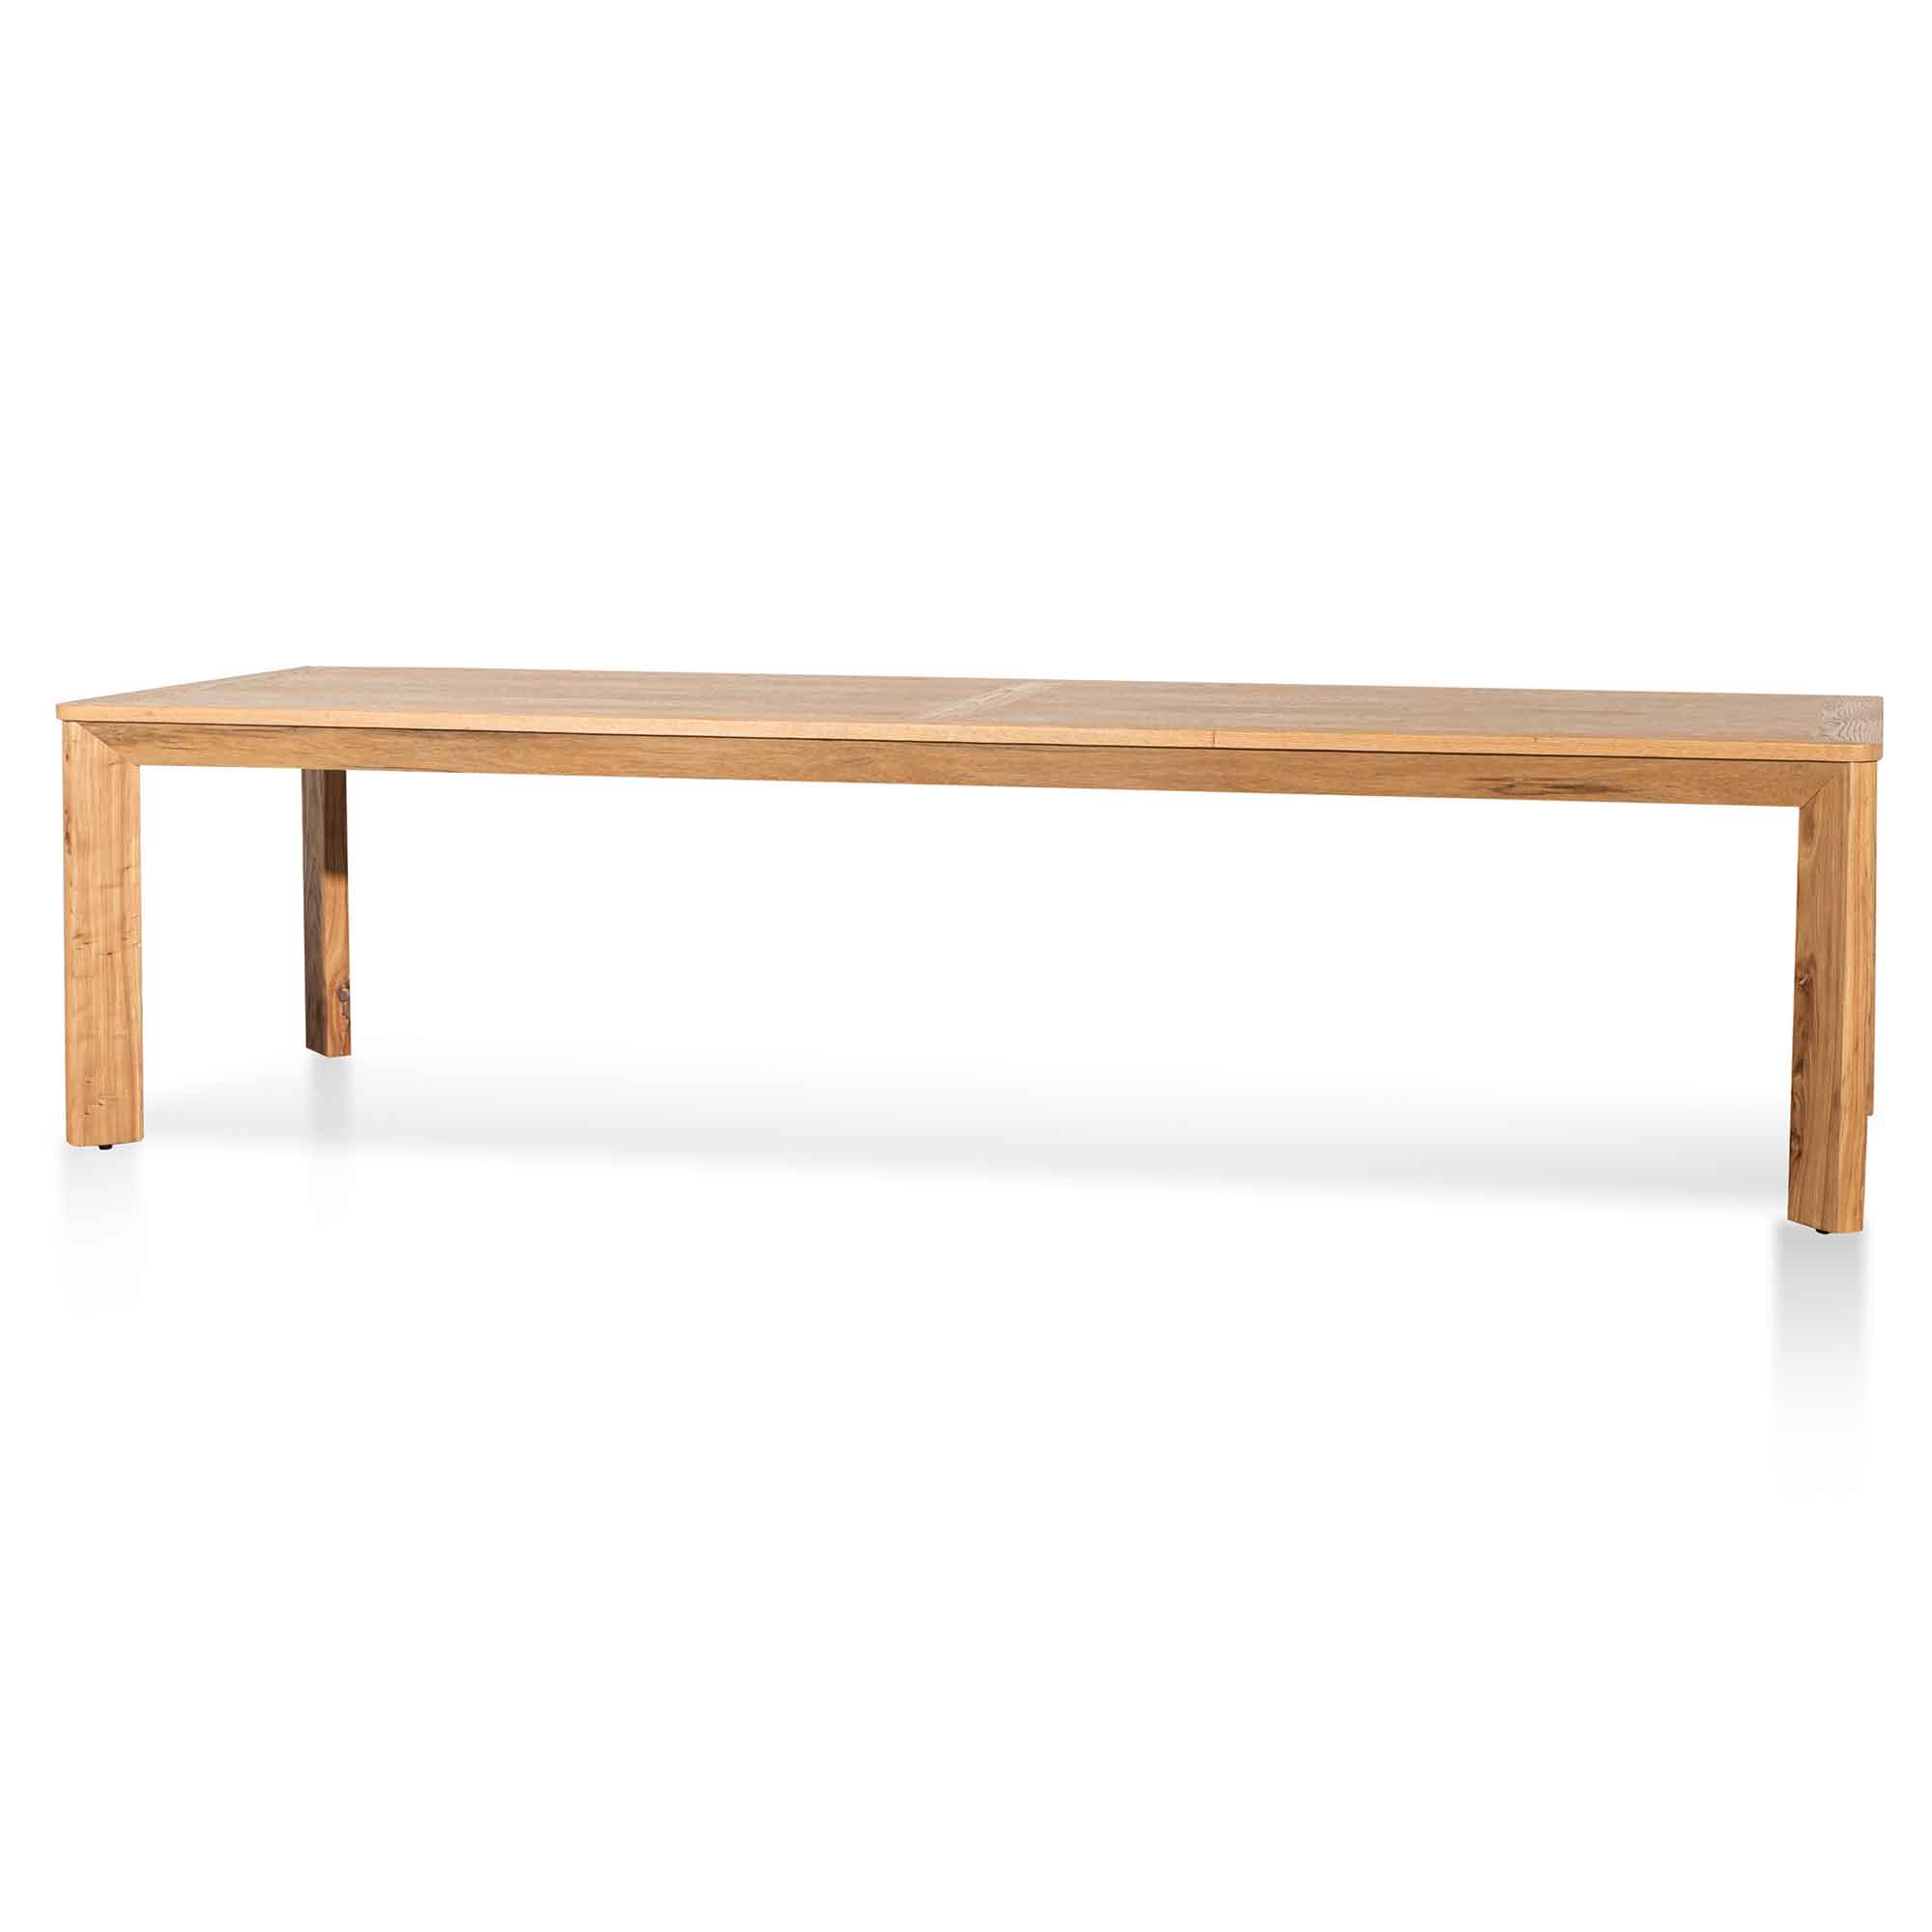 Madison 3m Wooden Dining Table - Distress  Natural